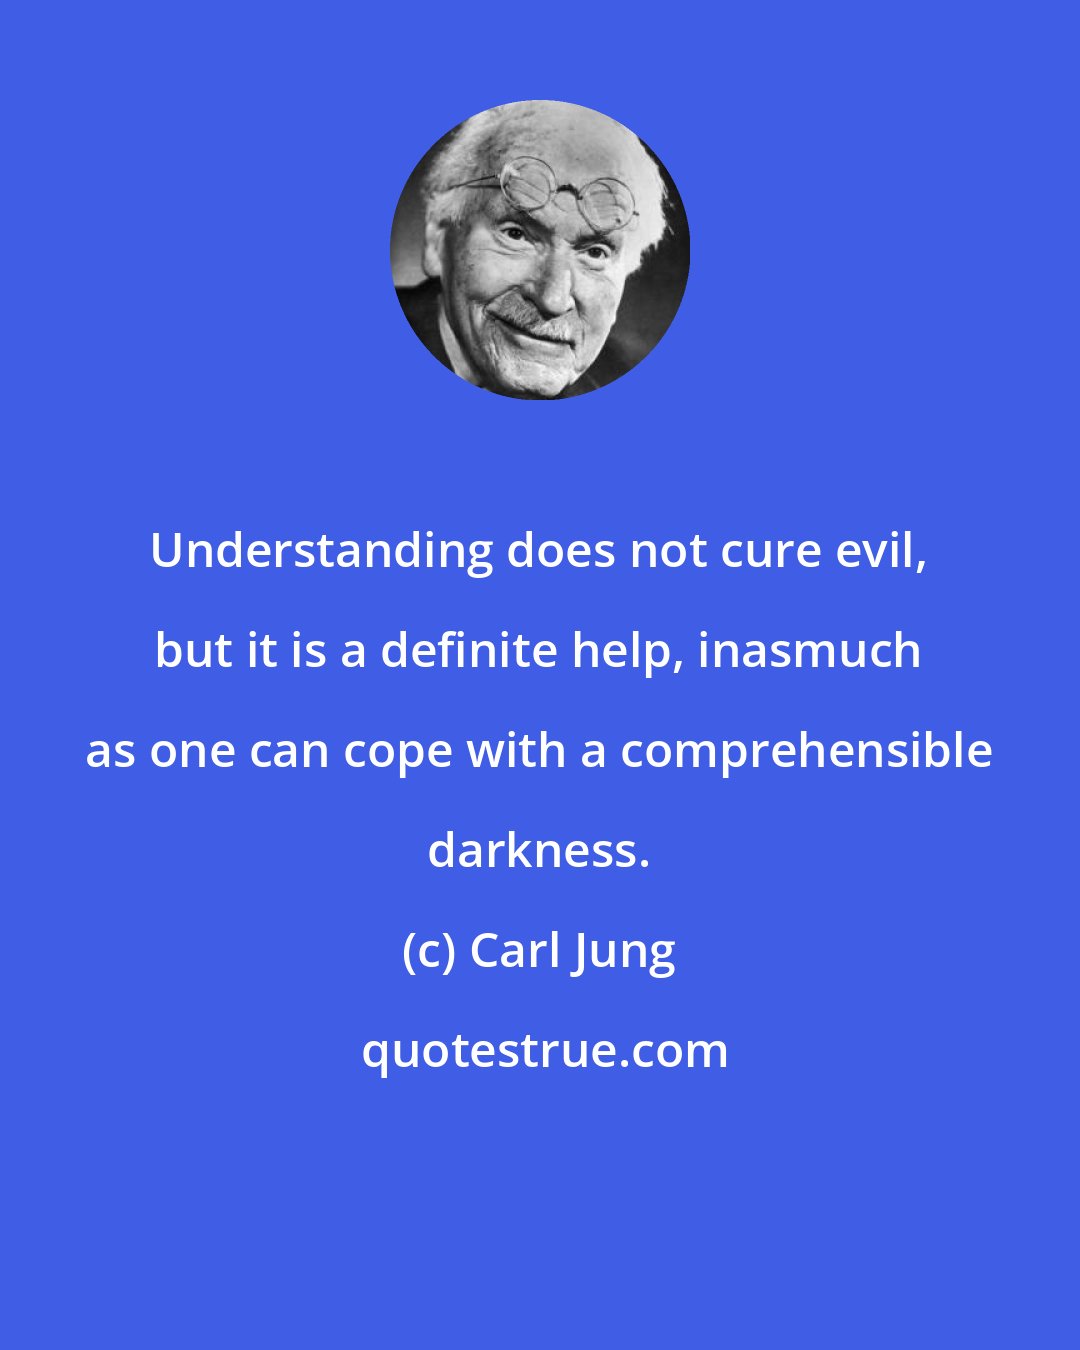 Carl Jung: Understanding does not cure evil, but it is a definite help, inasmuch as one can cope with a comprehensible darkness.